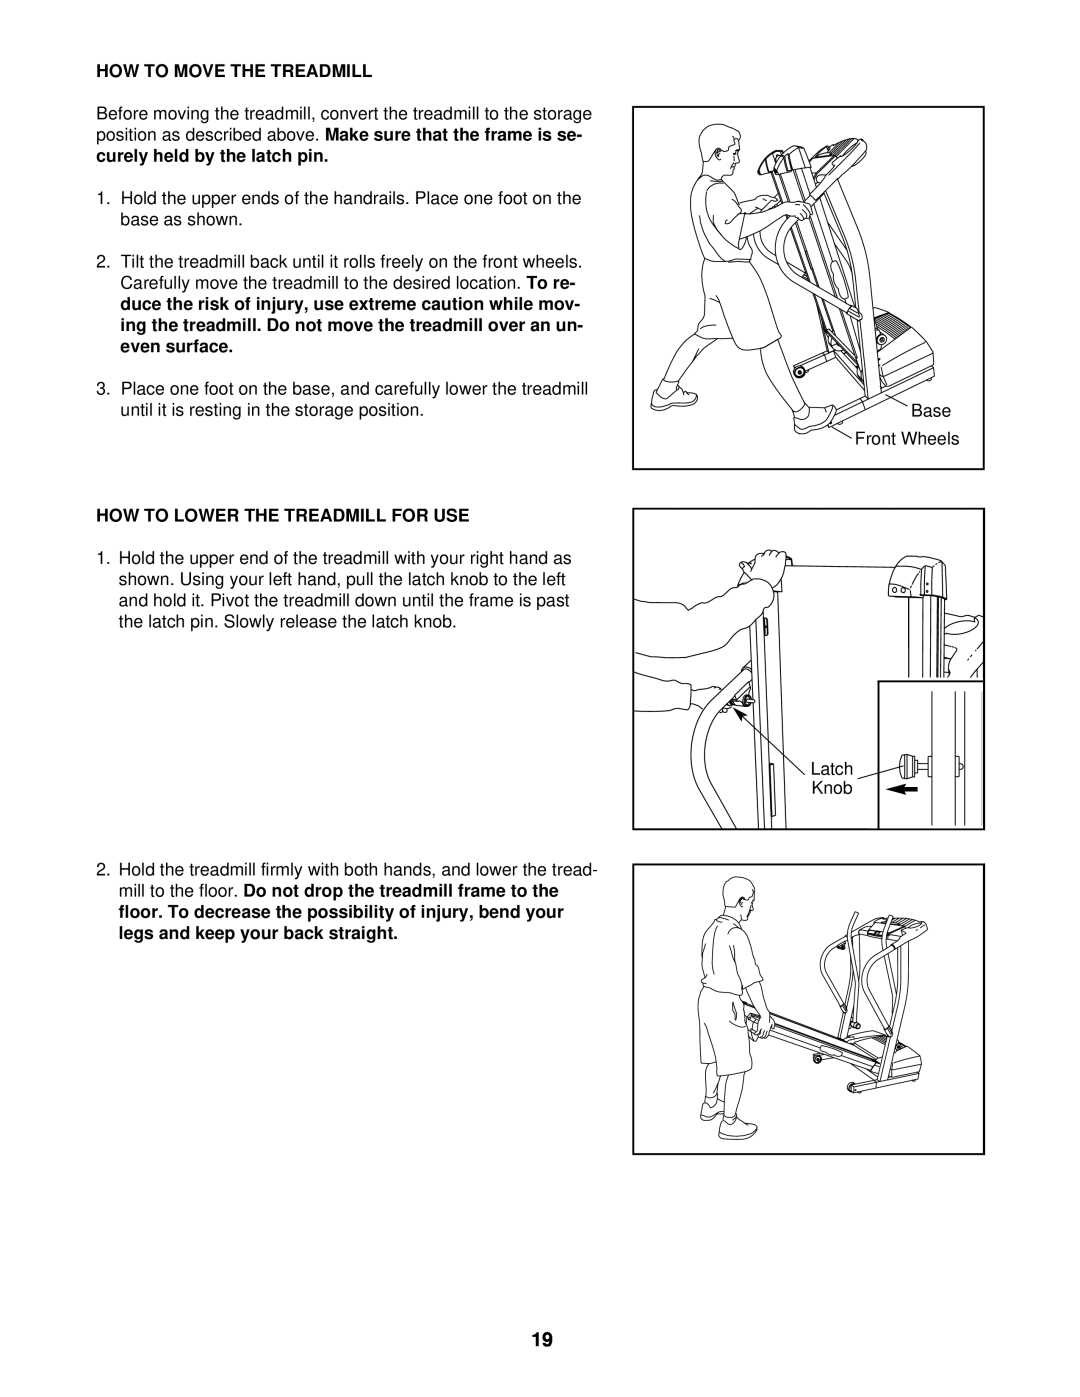 ProForm 831.293040 user manual How To Move The Treadmill, How To Lower The Treadmill For Use 